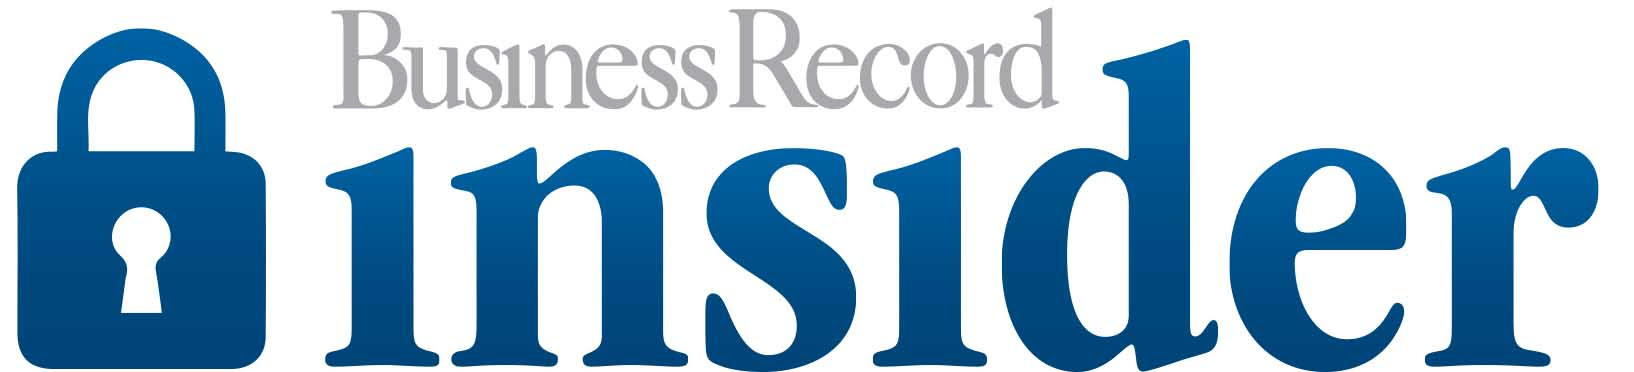 Business Record Insider